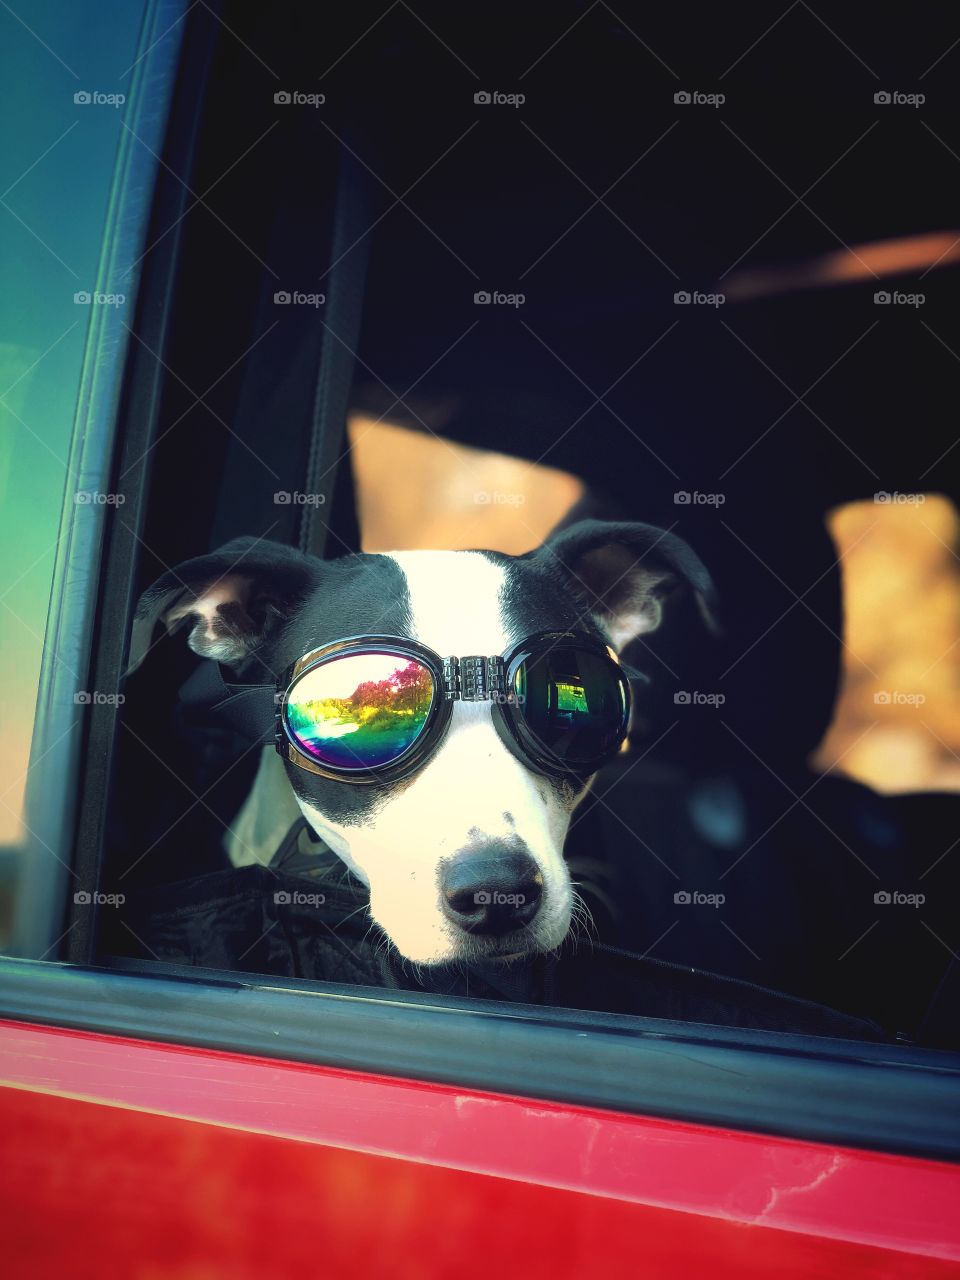 Cool black and white dog wearing colorful goggles